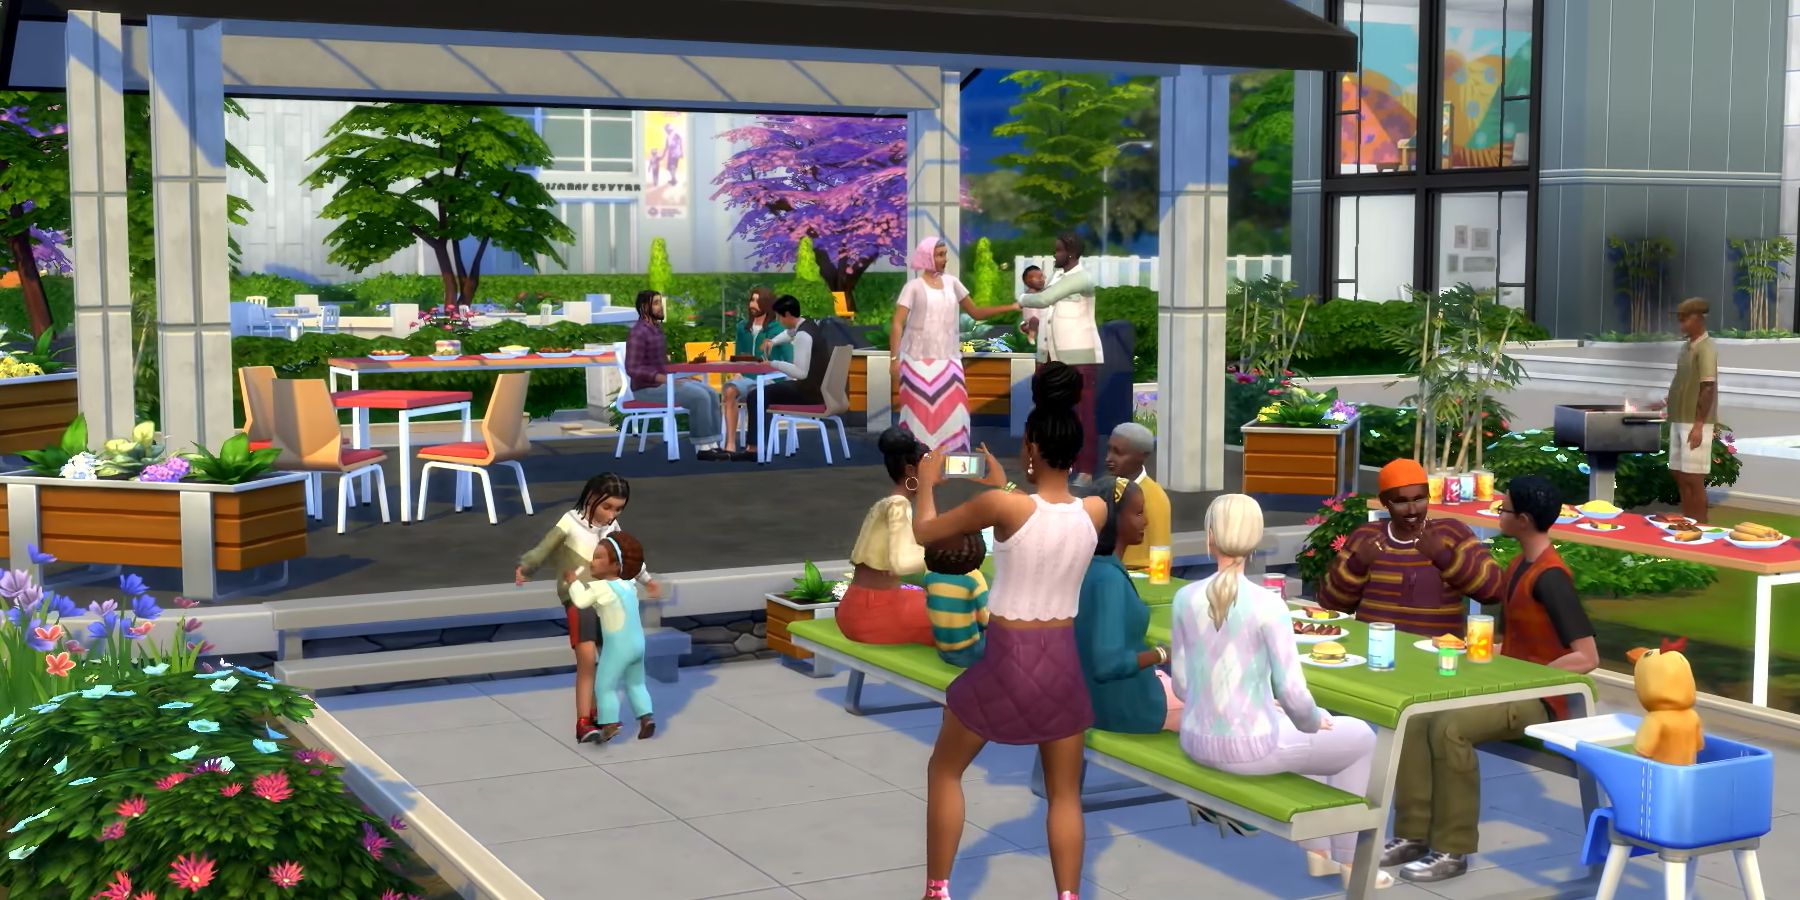 The Sims 4 Growing Together Community